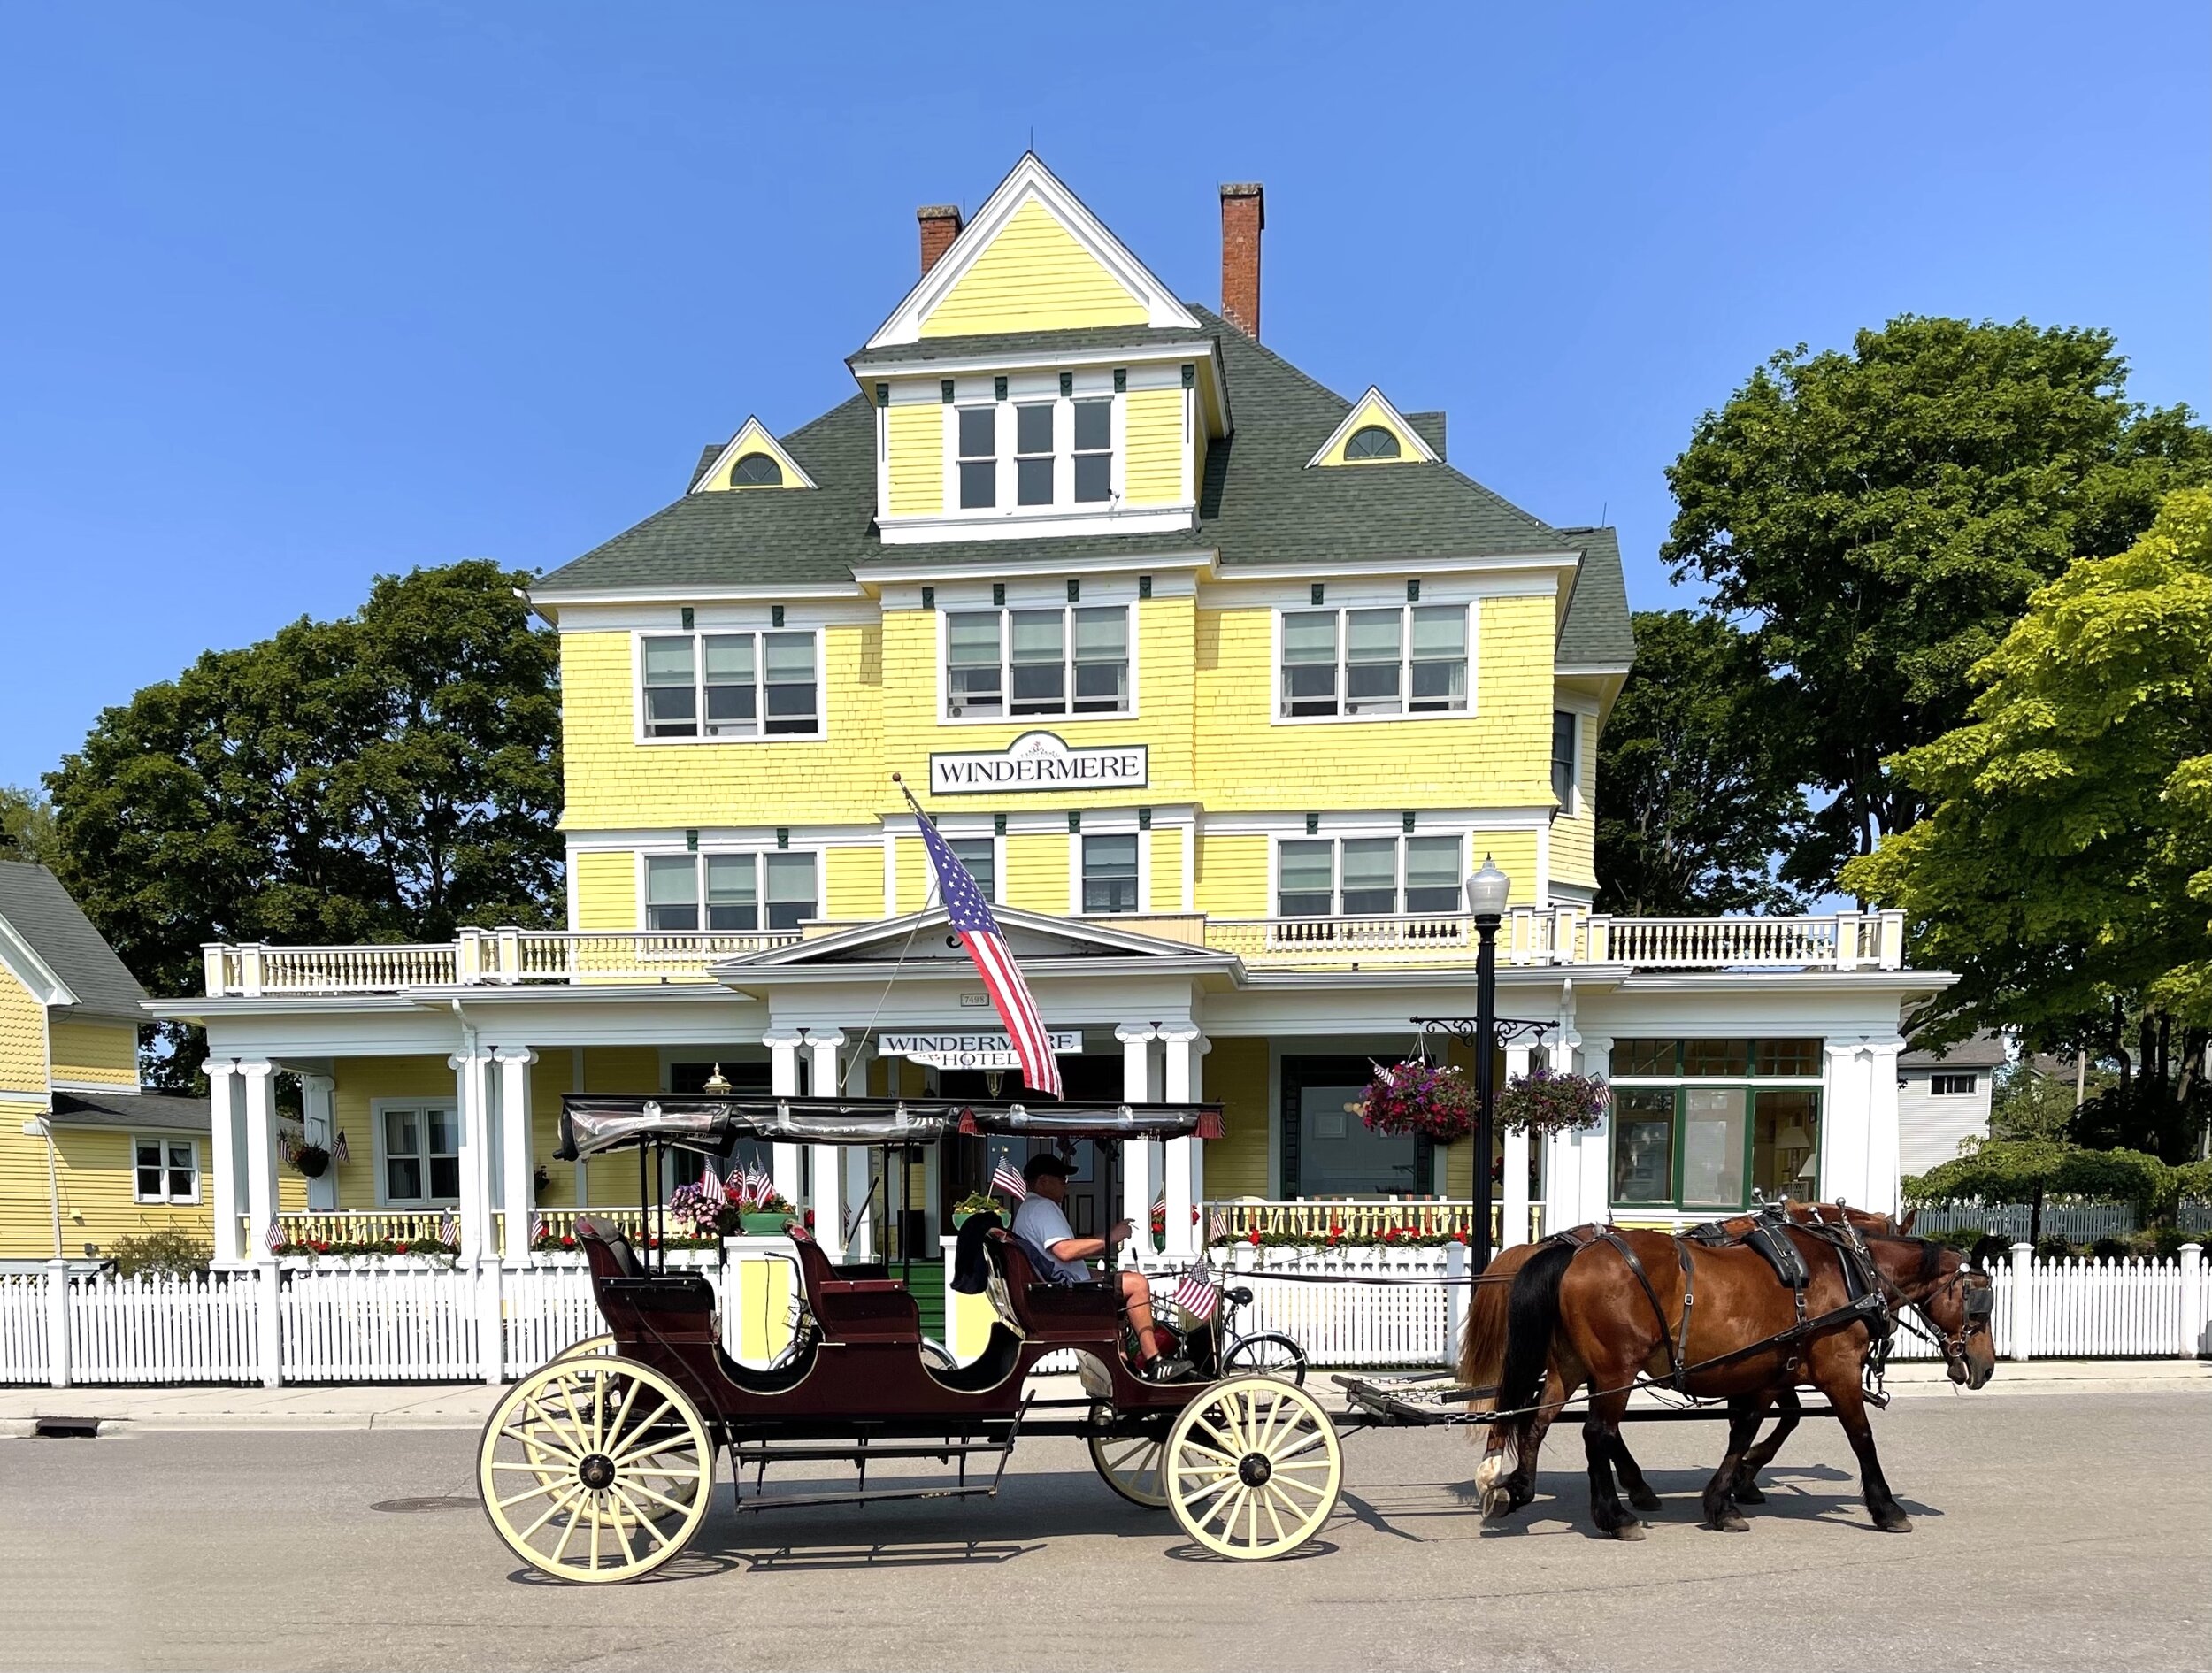  Mackinac’s population of full-time residents is around 1000 people, but the number rises into the thousands during the summer due to an influx of summer visitors and hundreds of seasonal workers. 